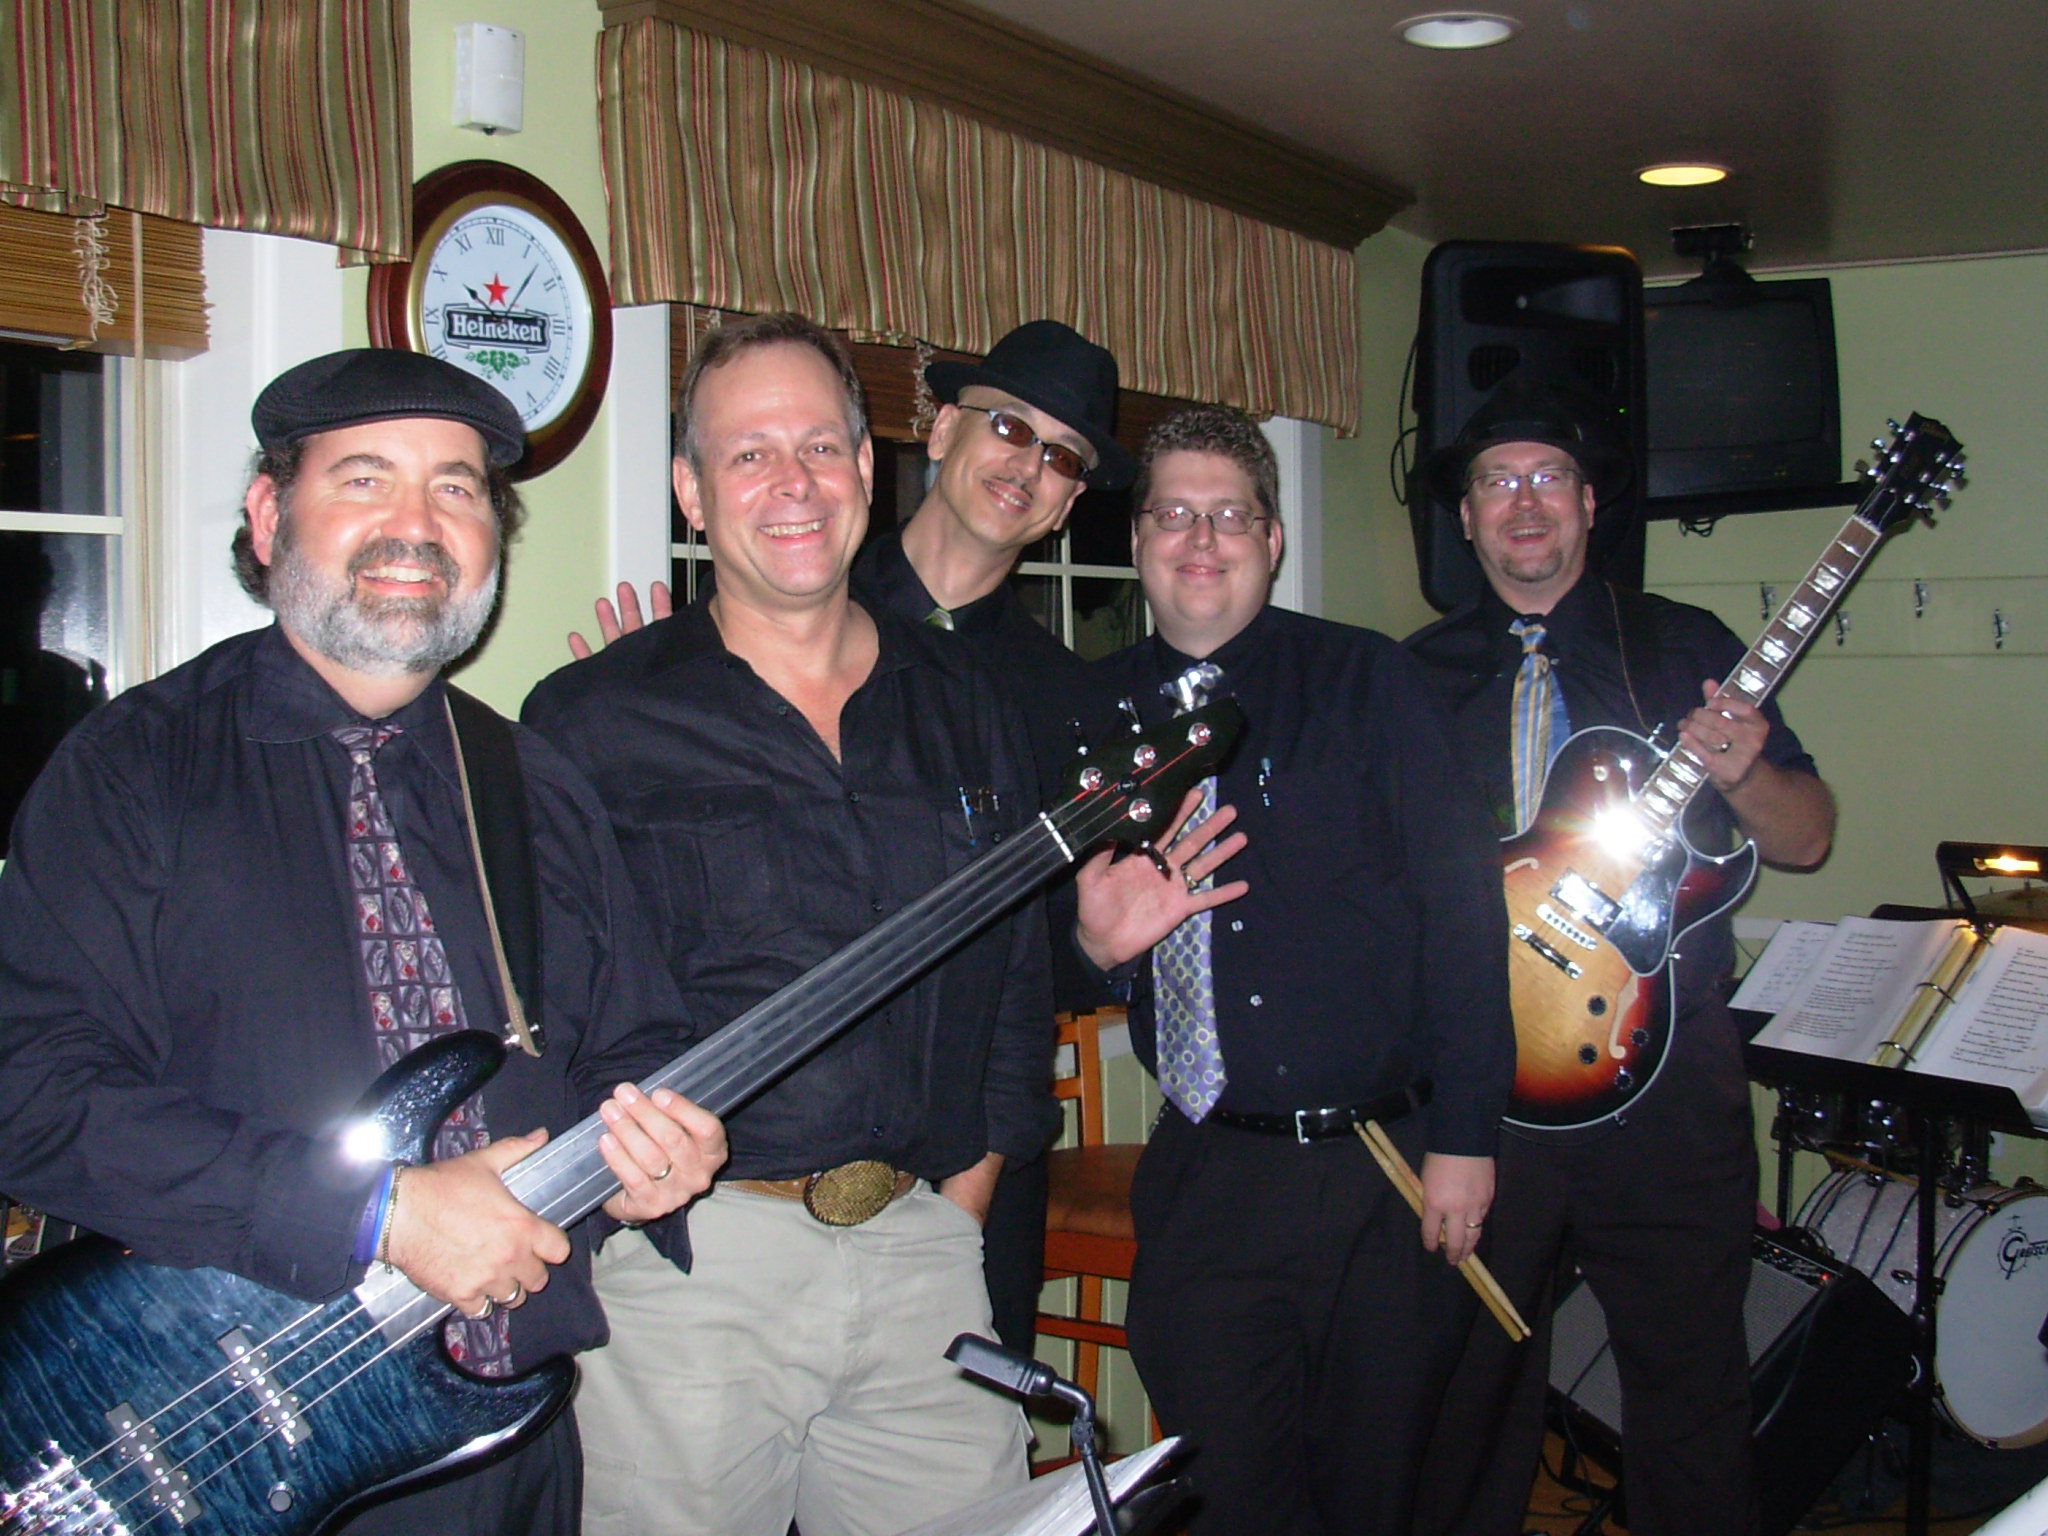 Owner Russ of the New Market Bistro joins the band...
Jazz Me will be playing regularly throughout next year.
